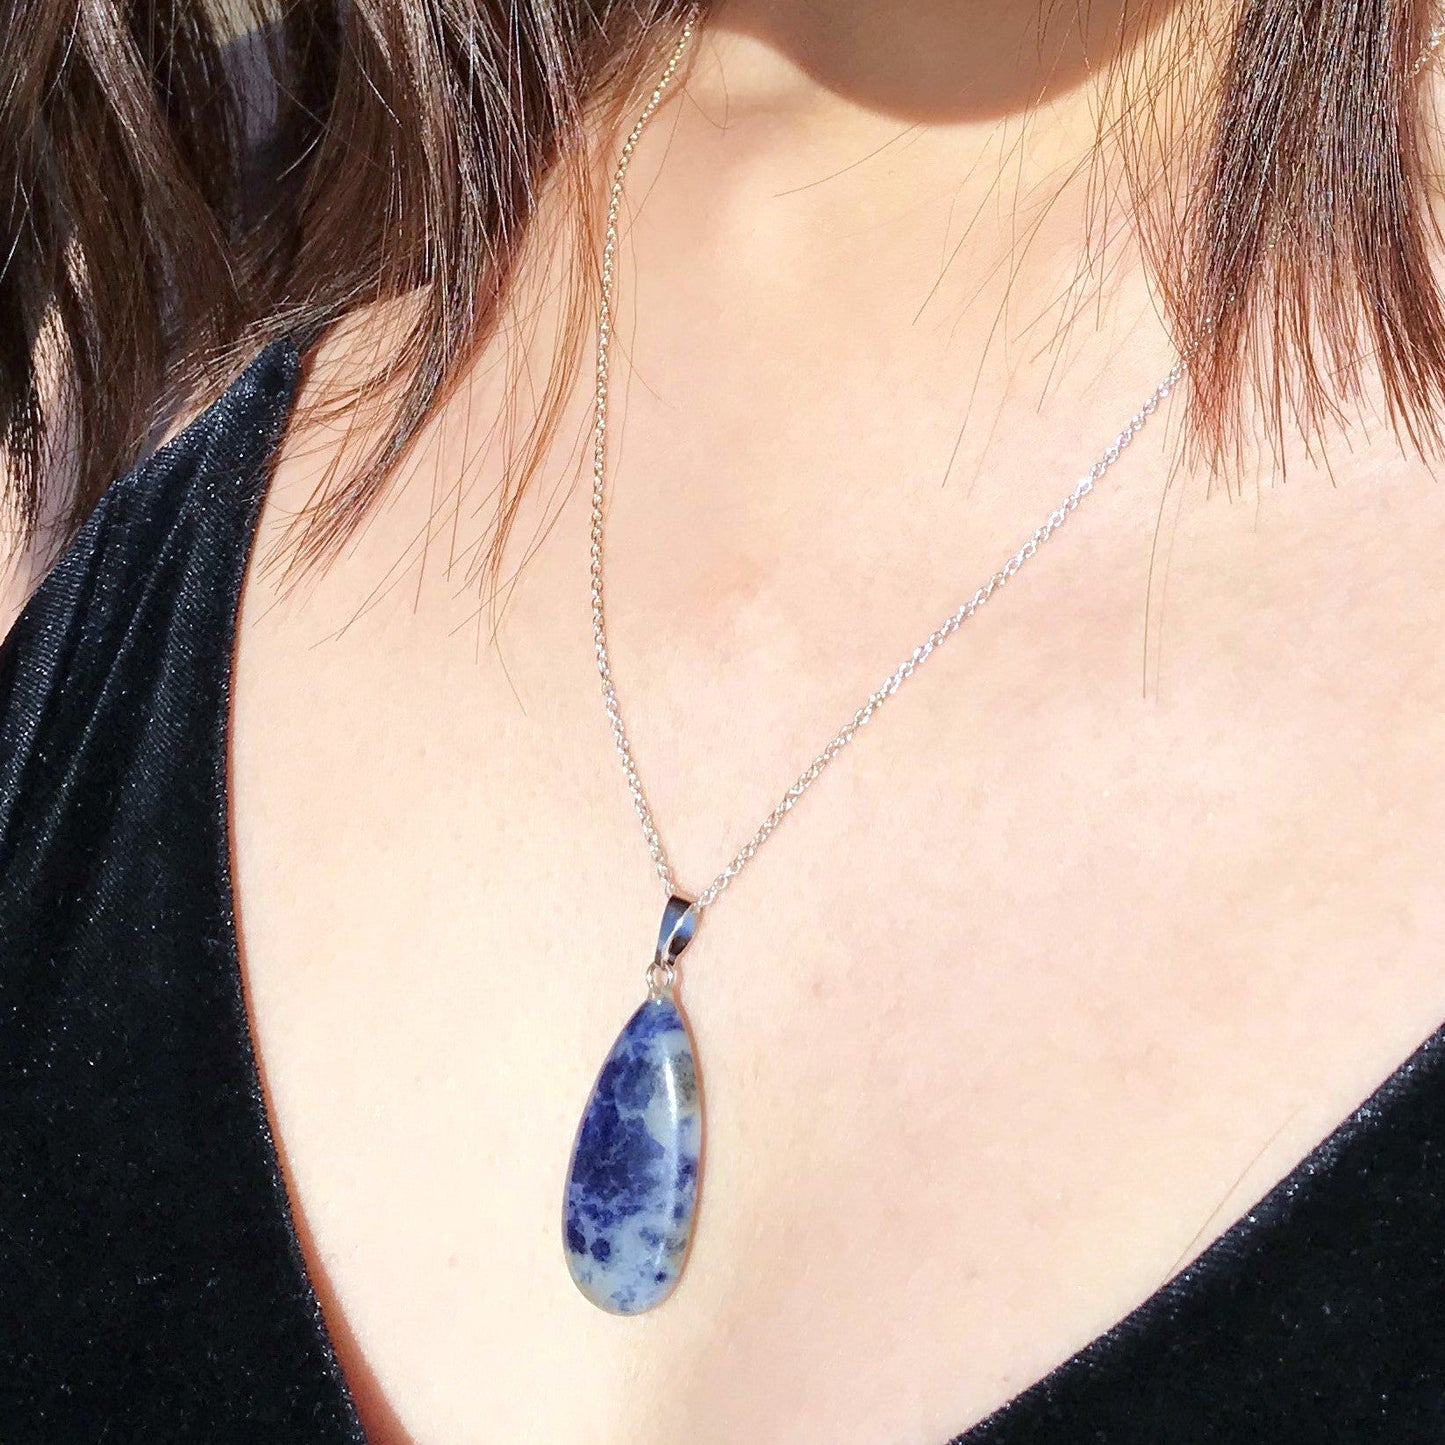 Sodalite Sterling Silver Necklace, Sodalite Pendant Necklace, Gemstone Necklace | by nlanlaVictory-8